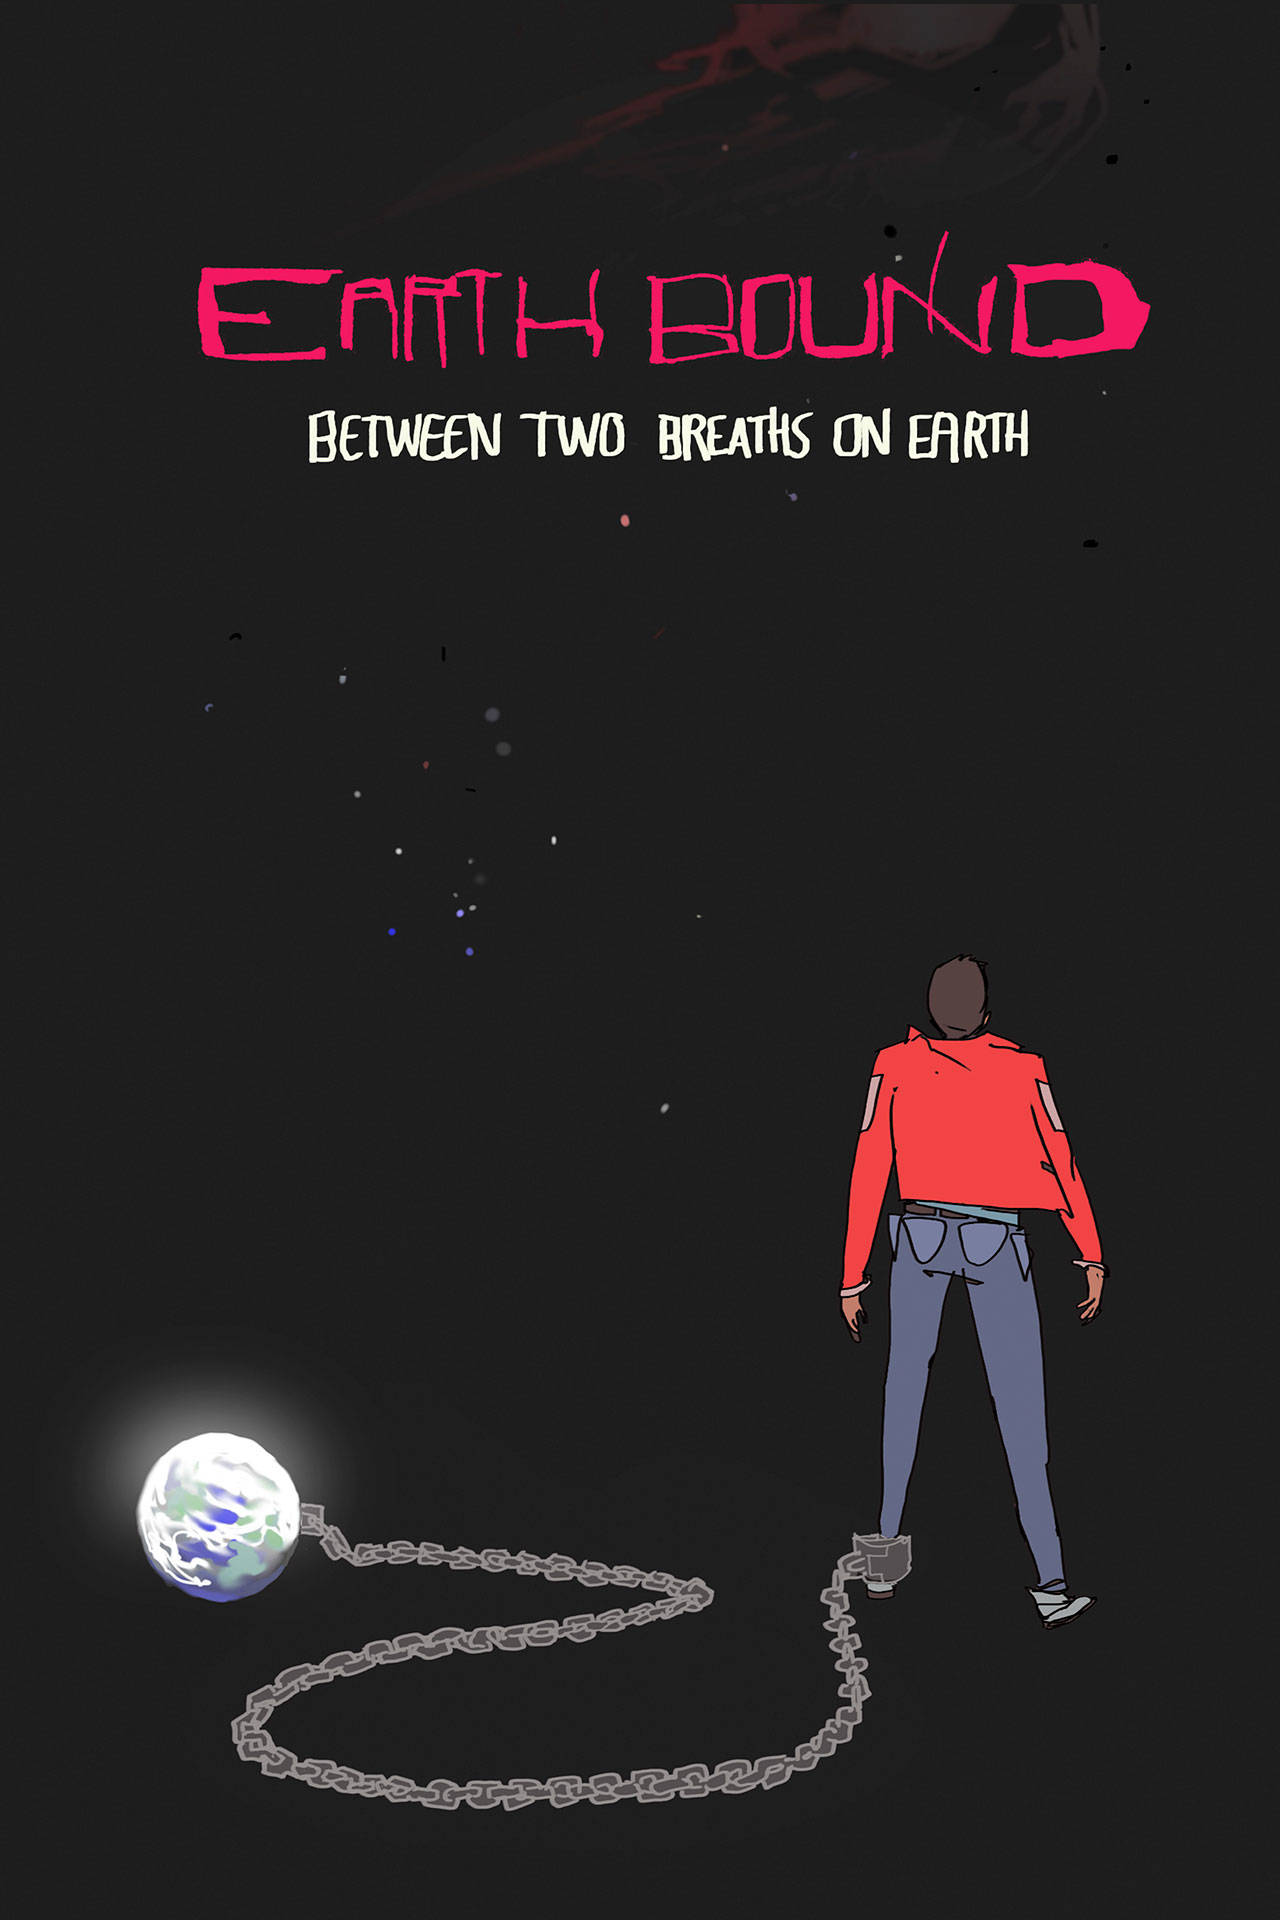 Per Berg plans to release the first four chapters of his comic book “Earthbound: Between Two Breaths on Earth” digitally through his Kickstarter campaign that ends Oct. 22. He plans to release around 600 pages of the story eventually. Submitted photo